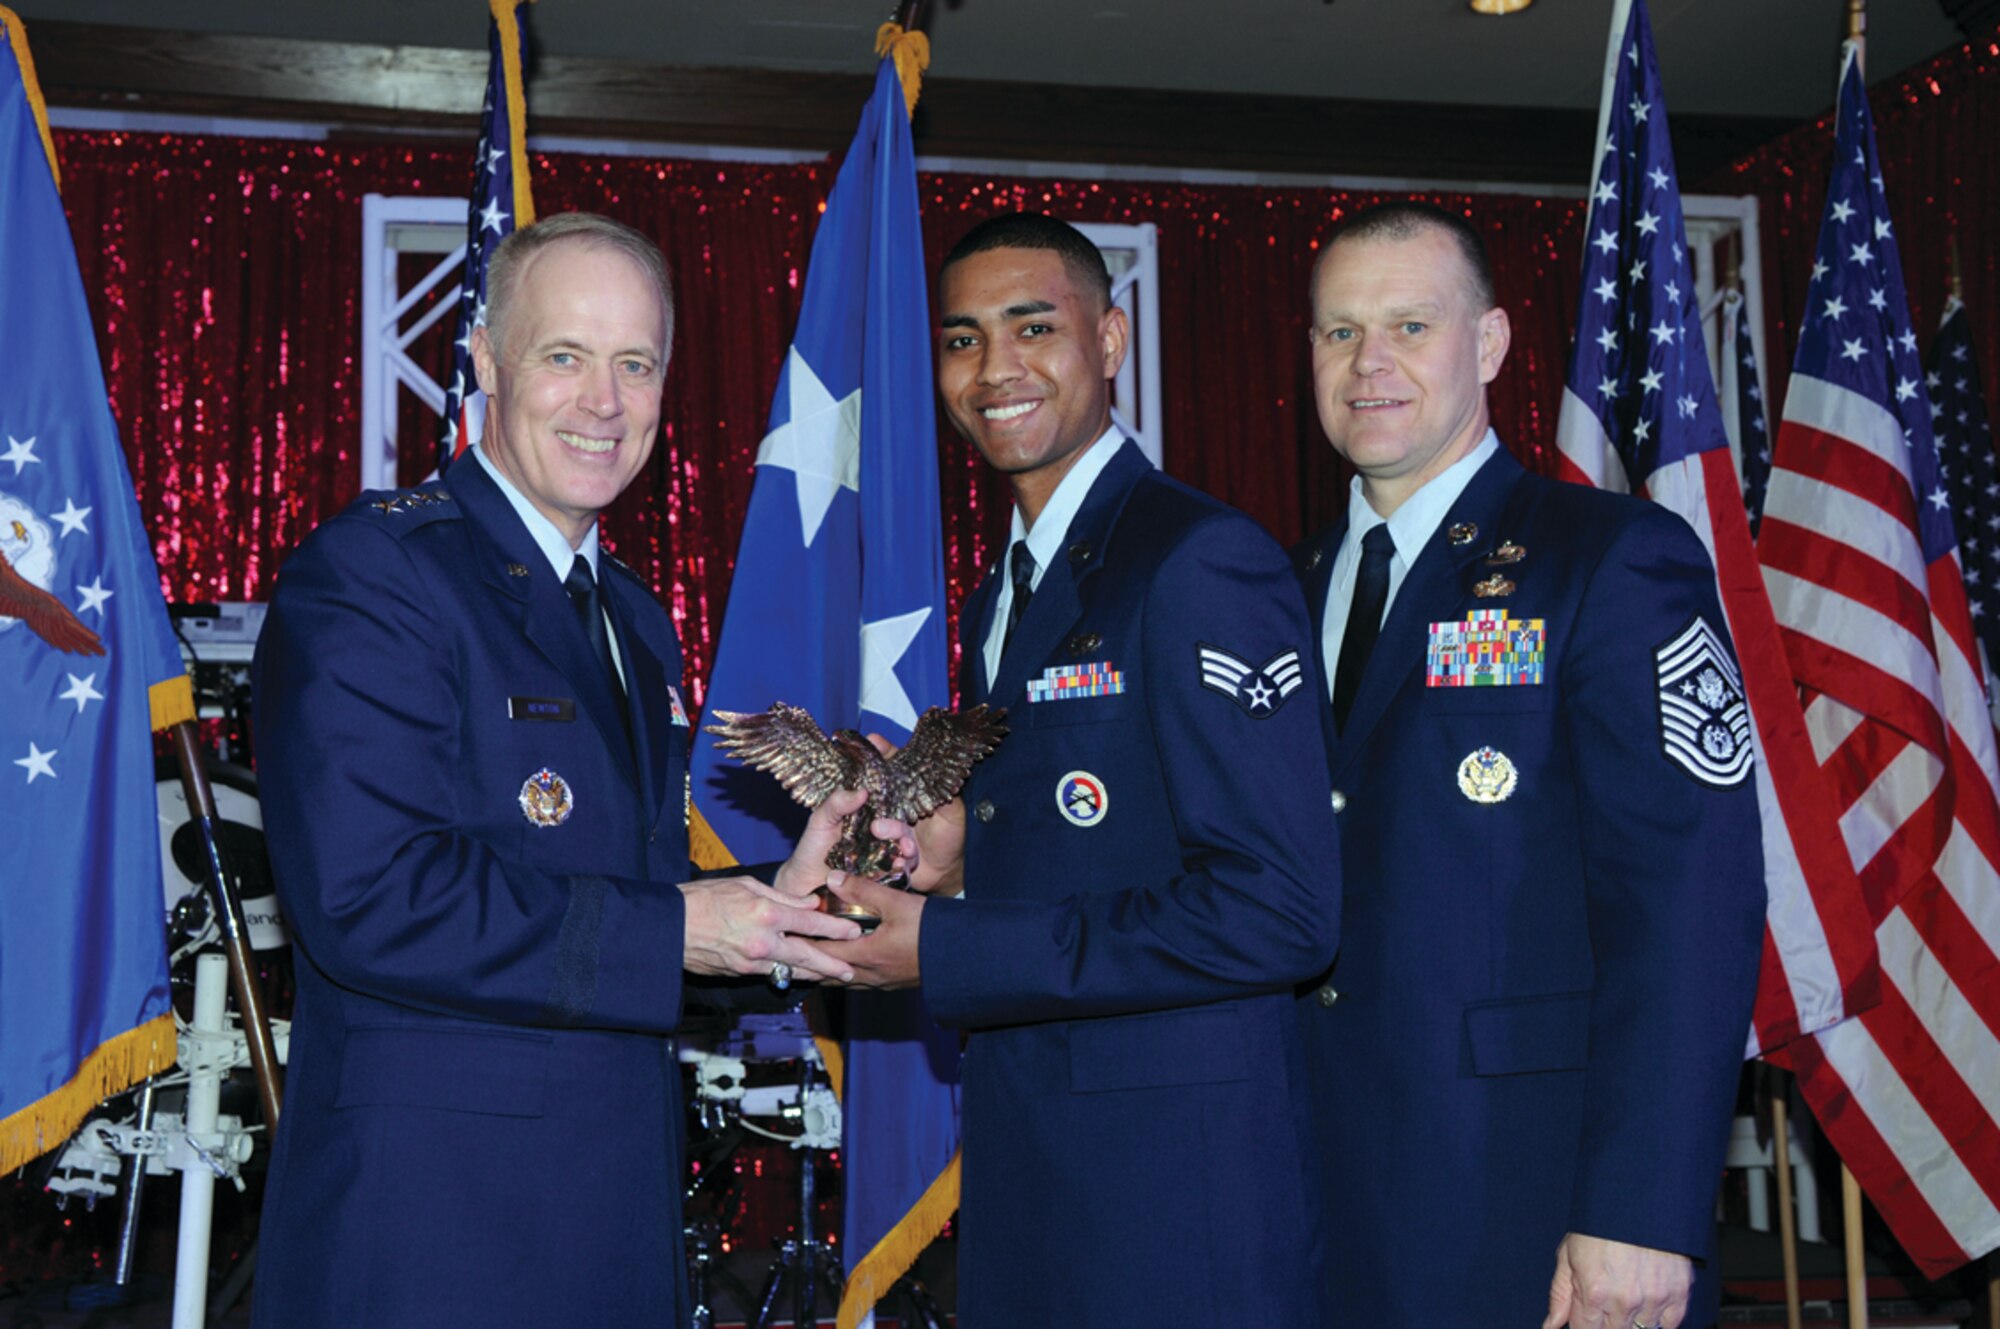 Senior Airman Byran J. Petry, 65th Forces Support Squadron, receives the "2009 Personnel Airman of the Year Award," presented by Lt. Gen. Richard Y. Newton, Deputy Chief of Staff for Manpower and Personnel, along with Chief Master Sgt of the Air Force James A. Roy.  The award was presented March 11 at the 2010 World Wide Force Support Conference Annual Awards Banquet in San Antonio, Texas. (Courtesy photo)